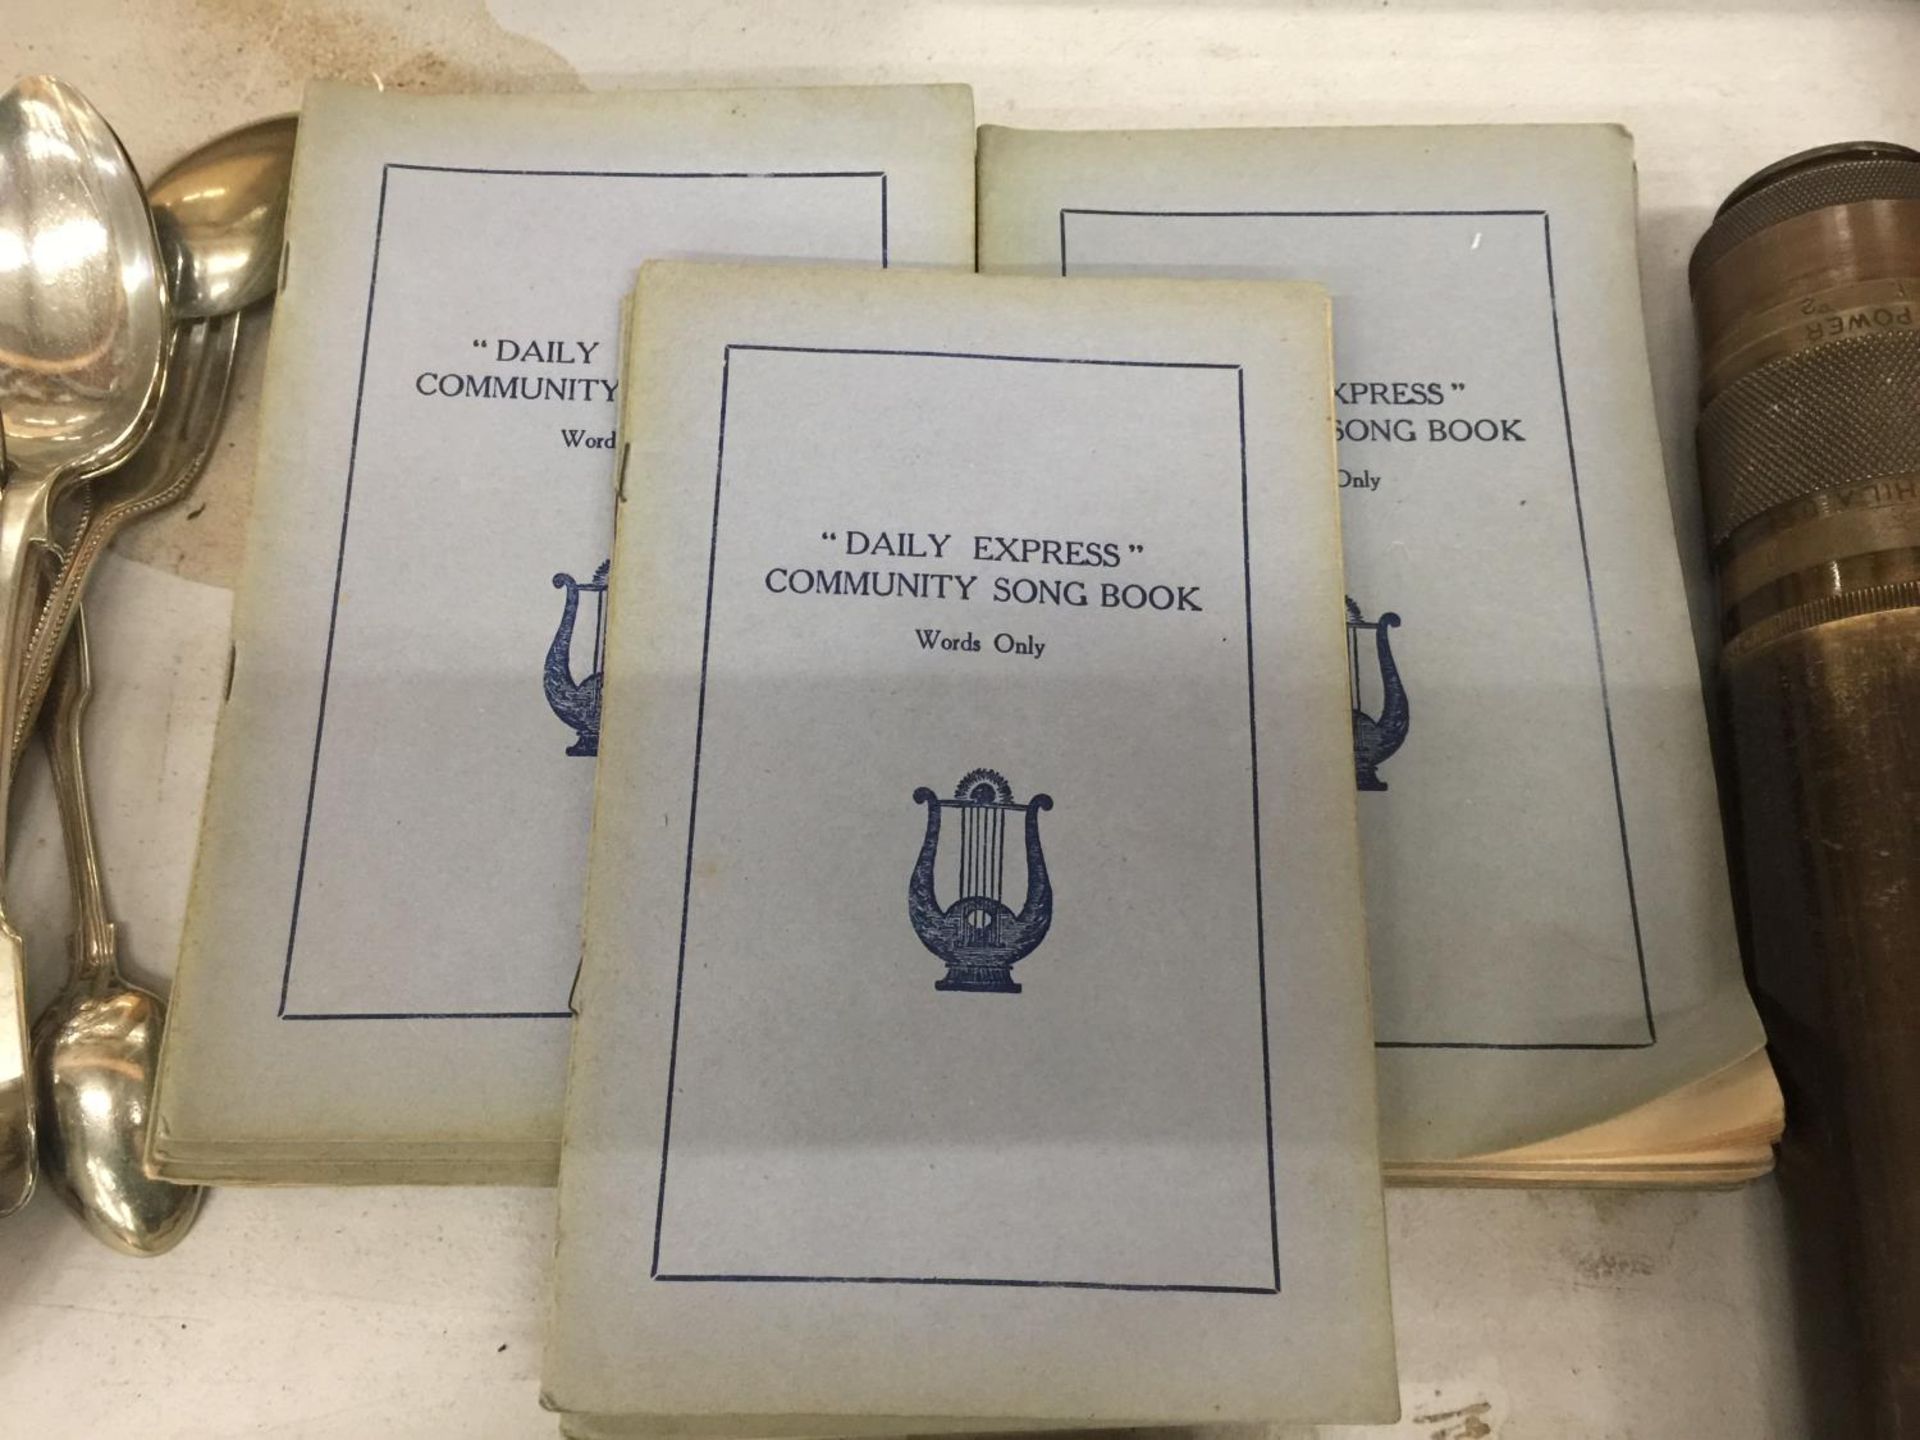 A COLLECTION OF 1927 'DAILY EXPRESS' COMMUNITY SONG BOOKS - 20 IN TOTAL